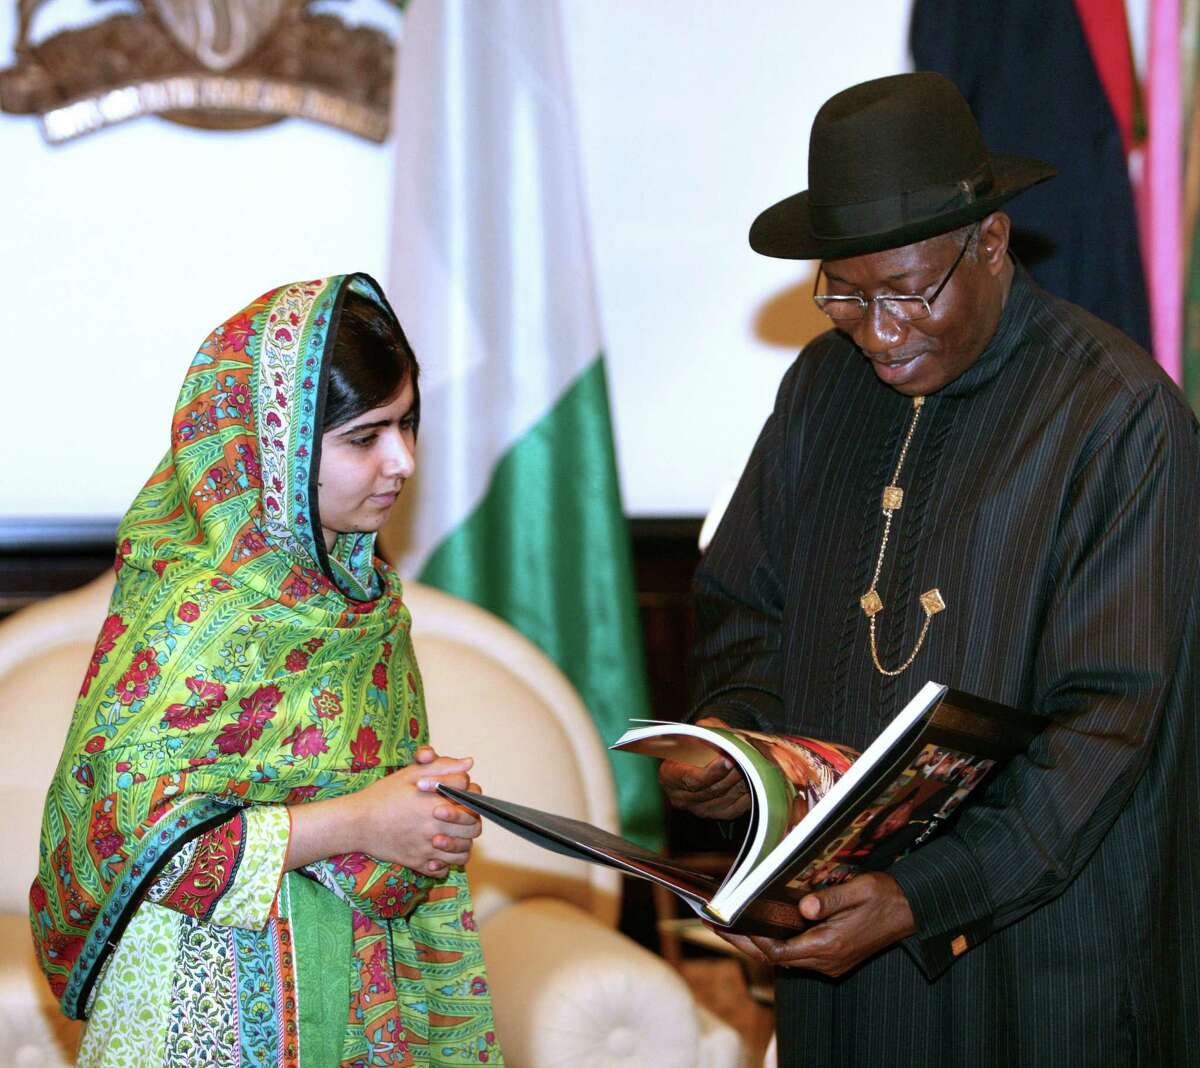 Malala Yousafzai, a Pakistani education and women's rights activist, meets with Nigerian President Goodluck Jonathan. While there, she urged the release of 219 Nigerian schoolgirls.